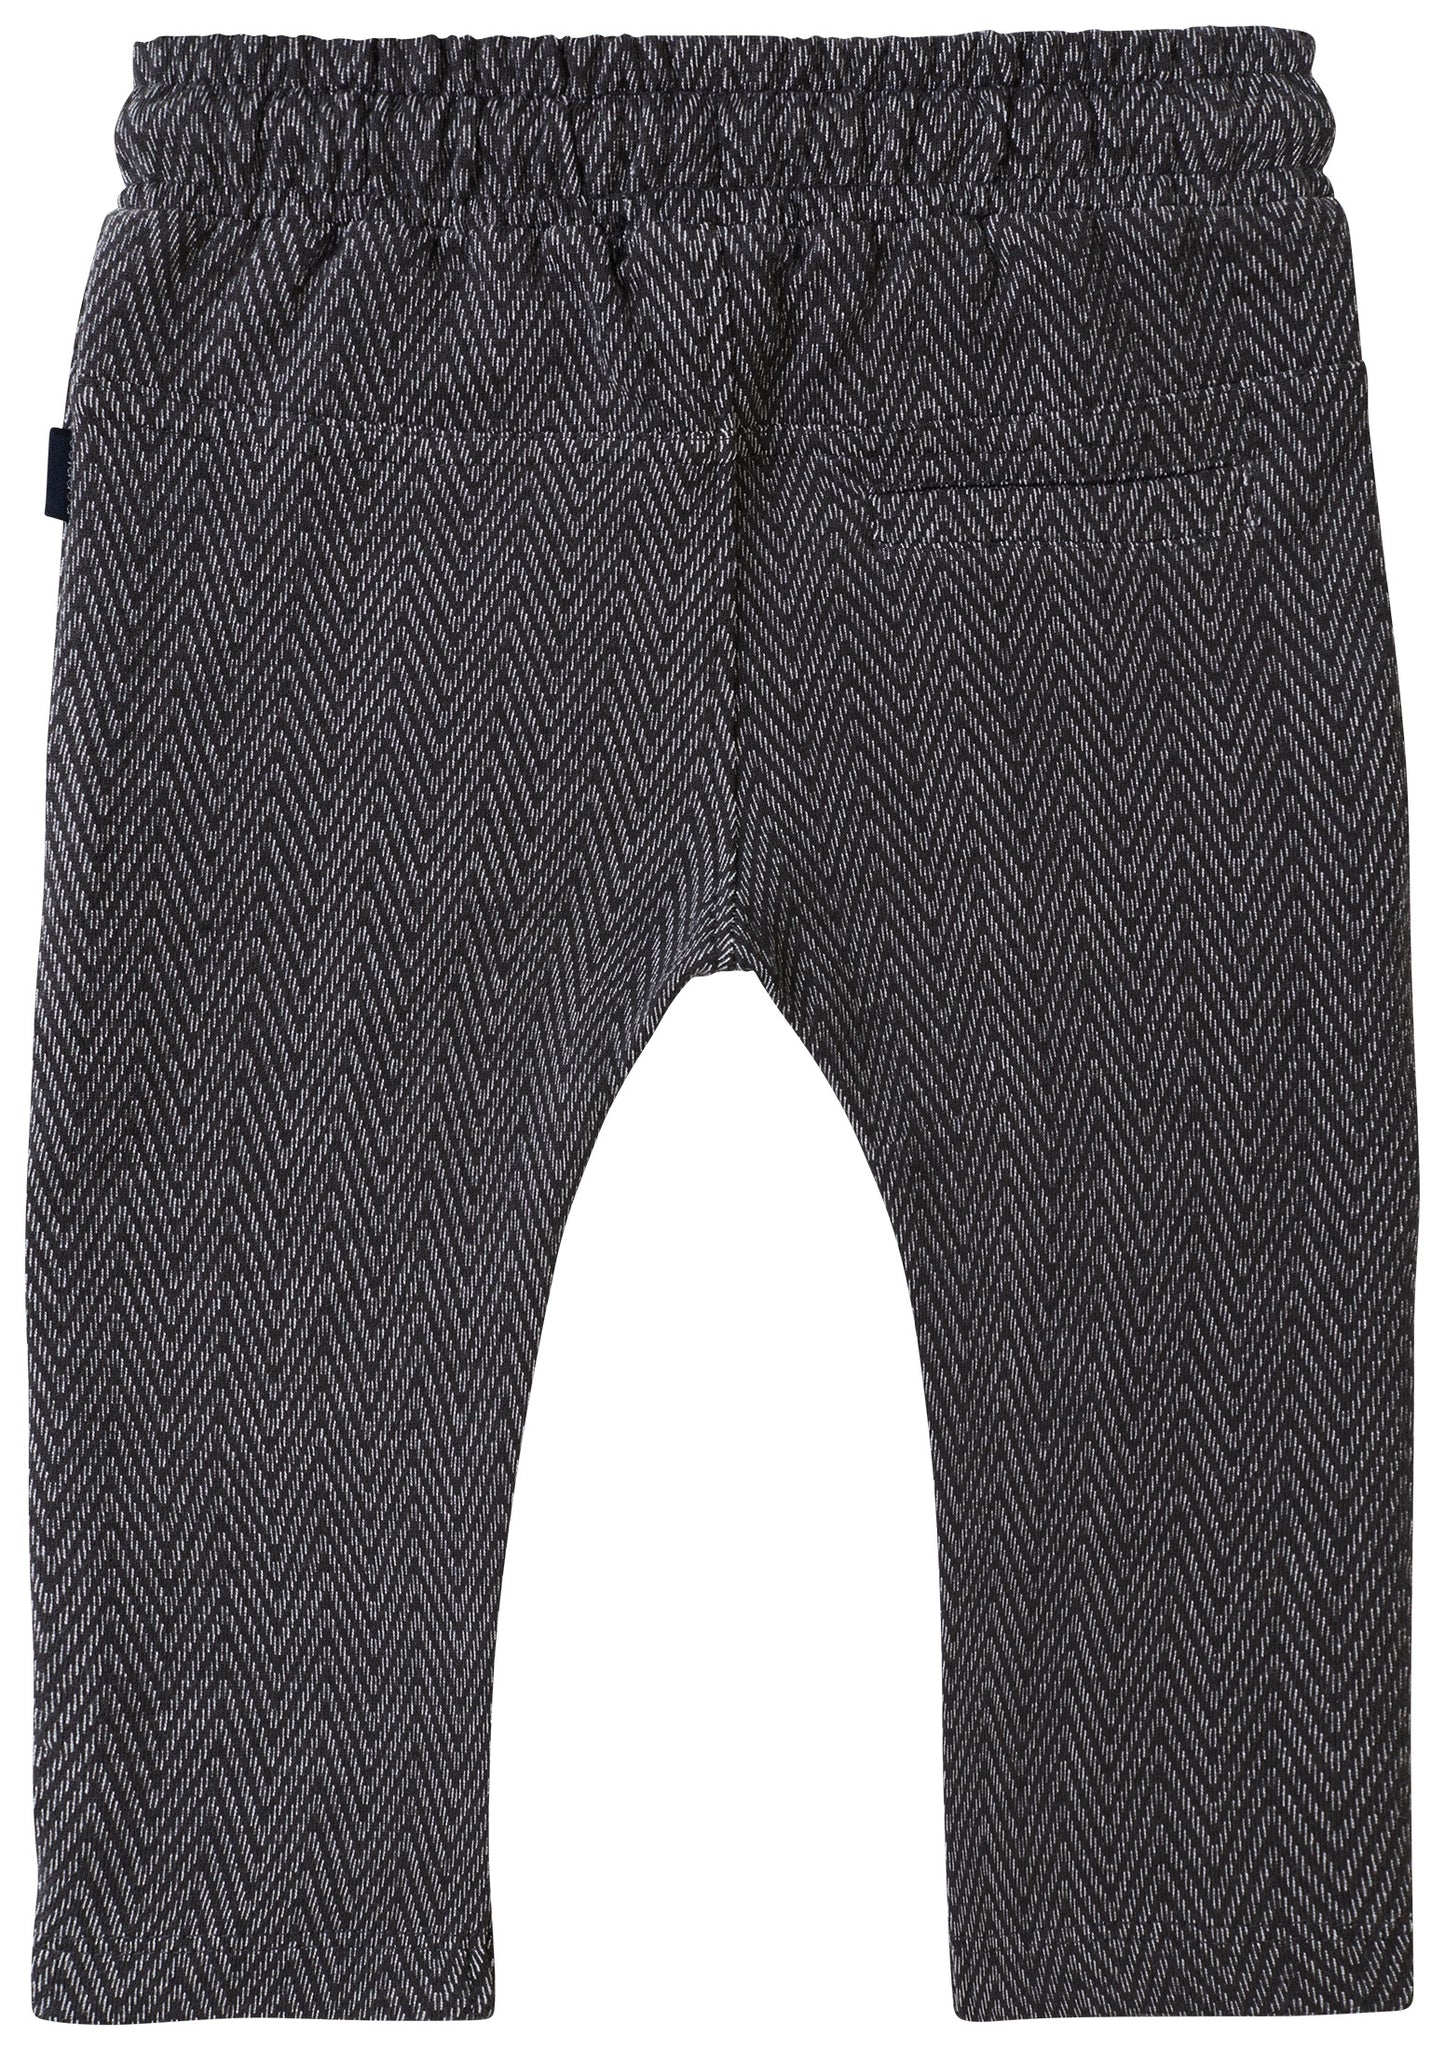 Boys pants Tigard relaxed fit allover print